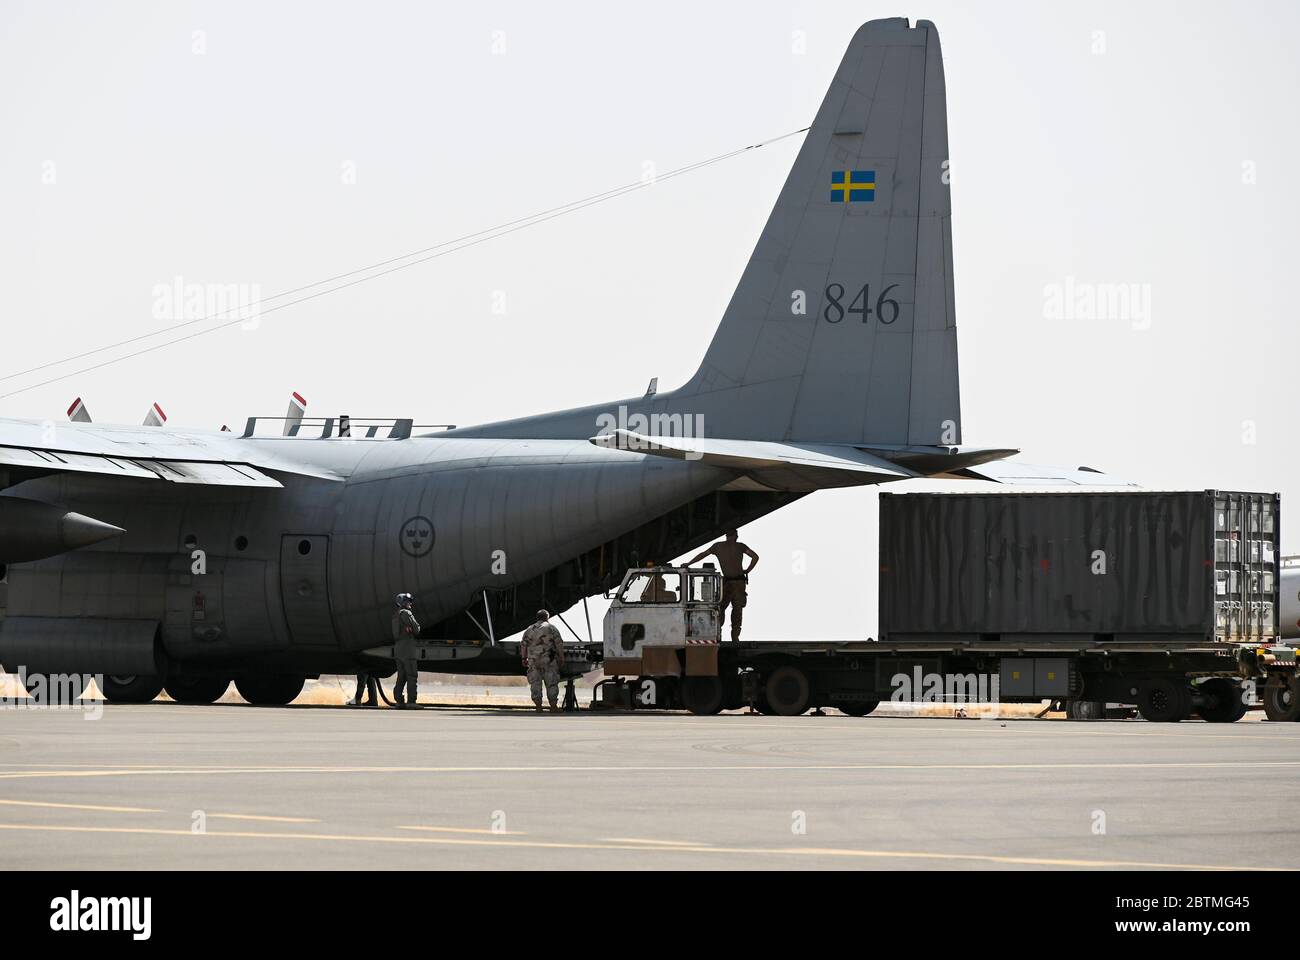 MALI, Gao, Minusma UN peace keeping mission, airport Gao, freight transport by swedish airforce with Lockheed C-130 Hercules Stock Photo